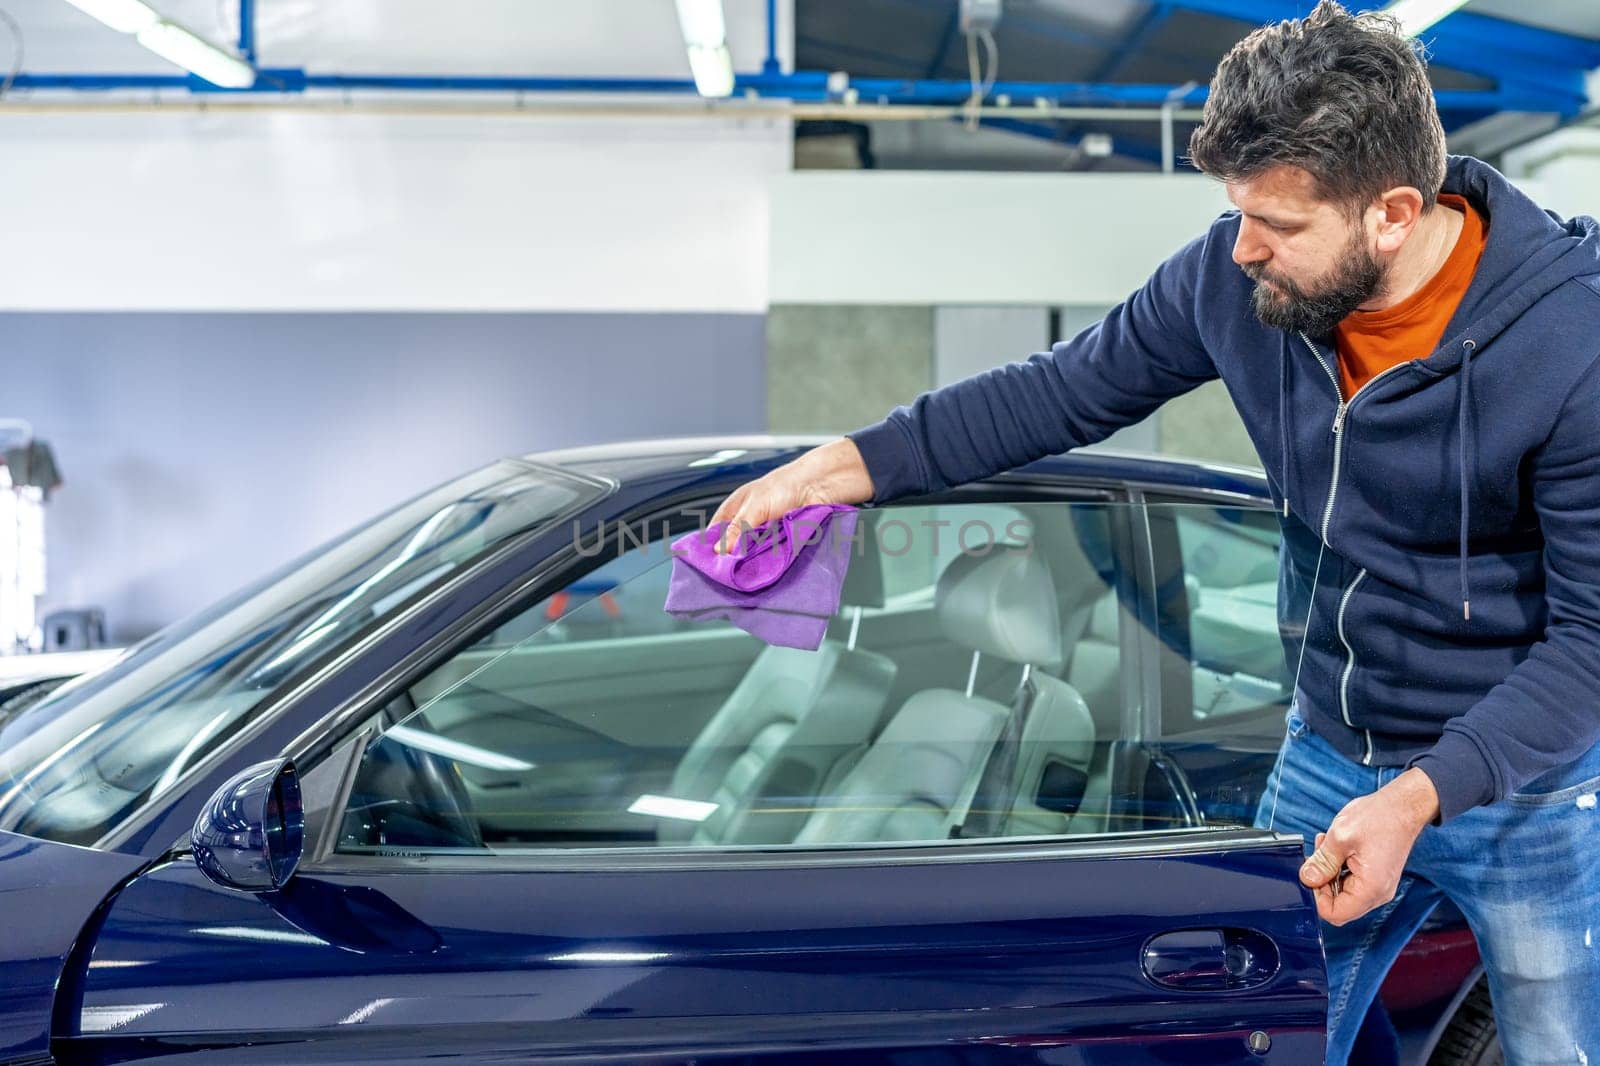 manual cleaning of luxury car windows with a microfiber towel in the garage by Edophoto